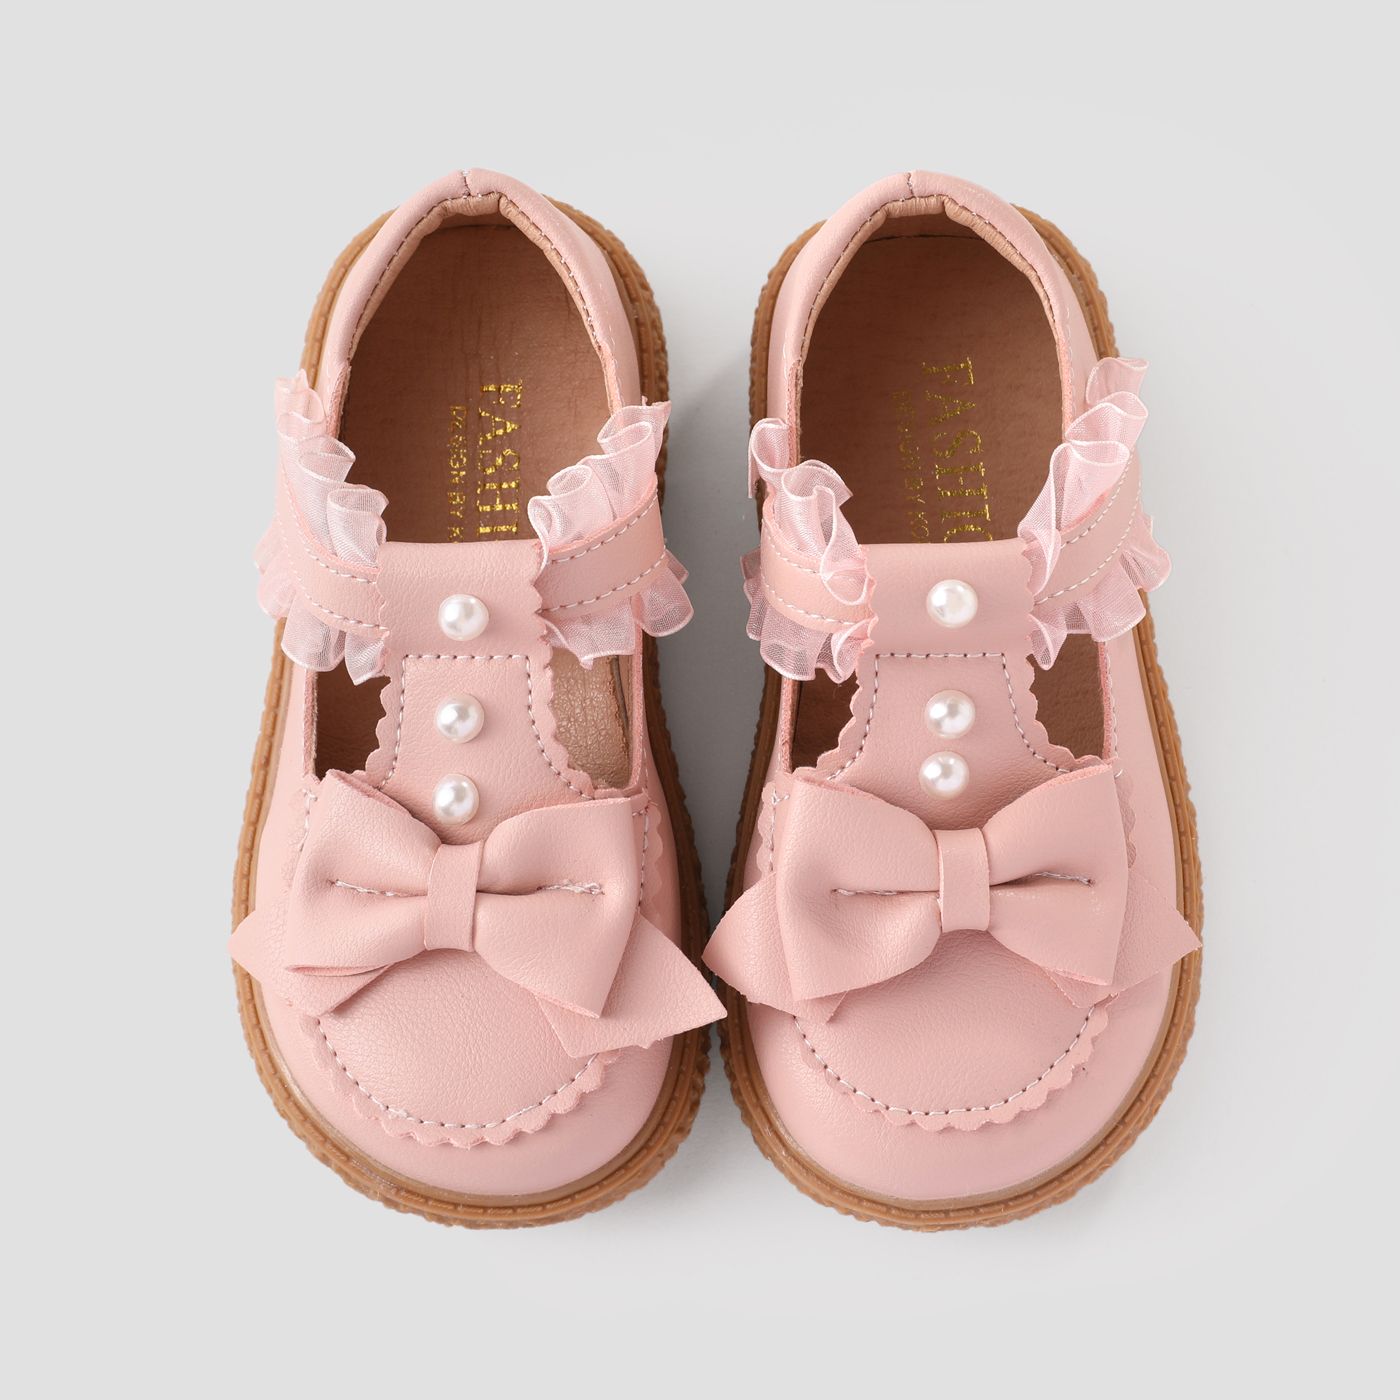 Toddler & Kid Girls Sweet Bow & Fax-pearl Decor Leather Shoes